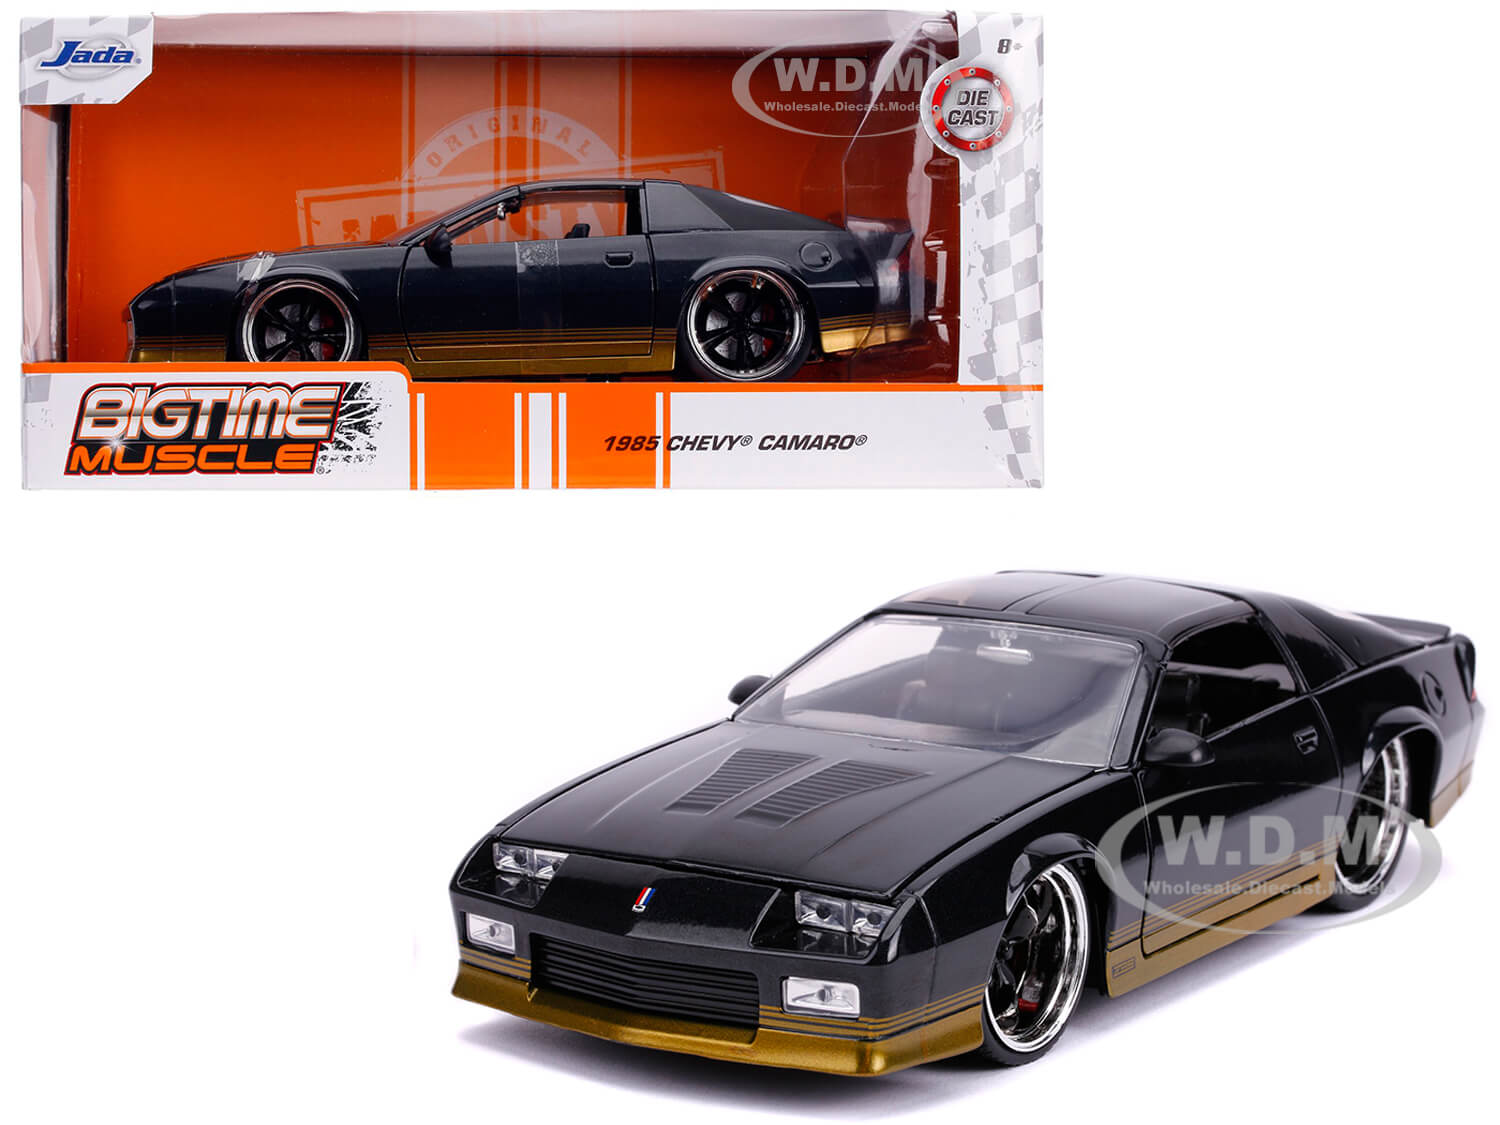 1985 Chevrolet Camaro Z28 Black Metallic with Gold Stripes Bigtime Muscle 1/24 Diecast Model Car by Jada